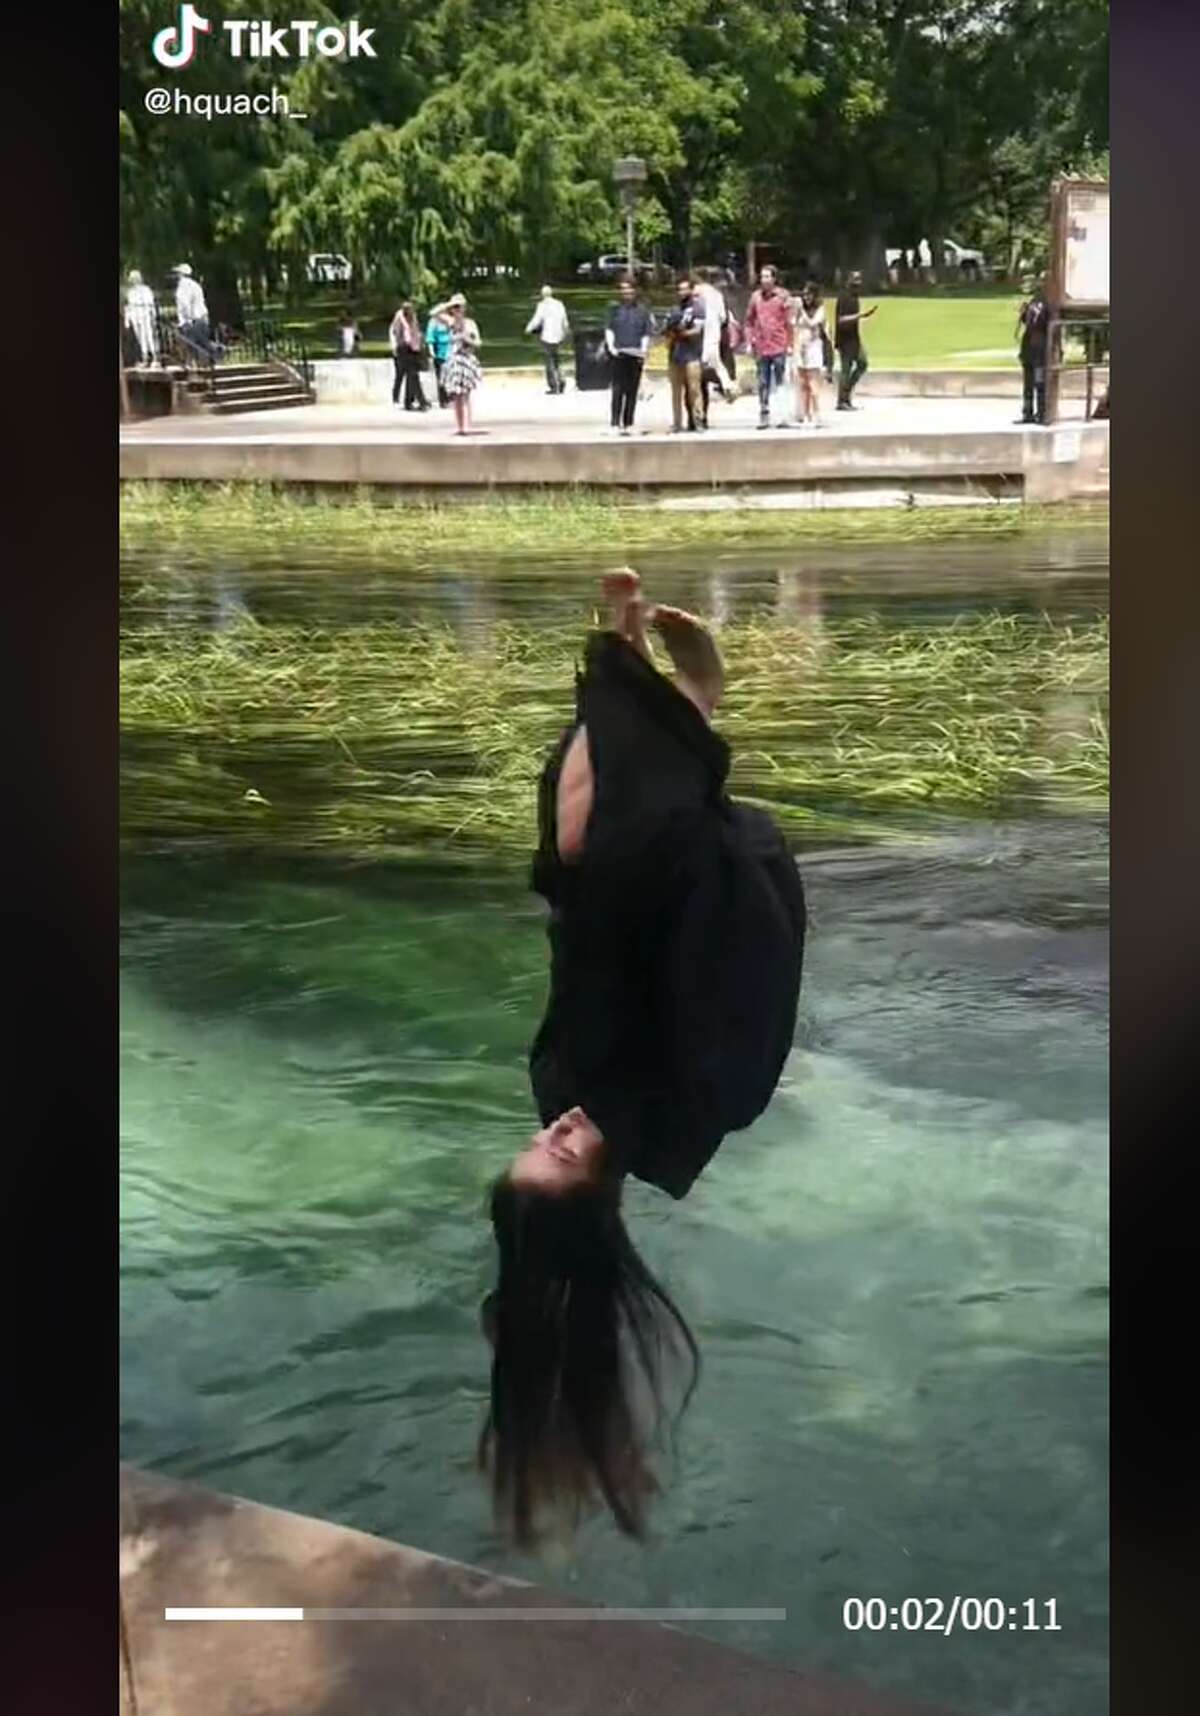 A screenshot of a TikTok video showing a Texas State University graduate from 2019 flipping into the river after commencement.